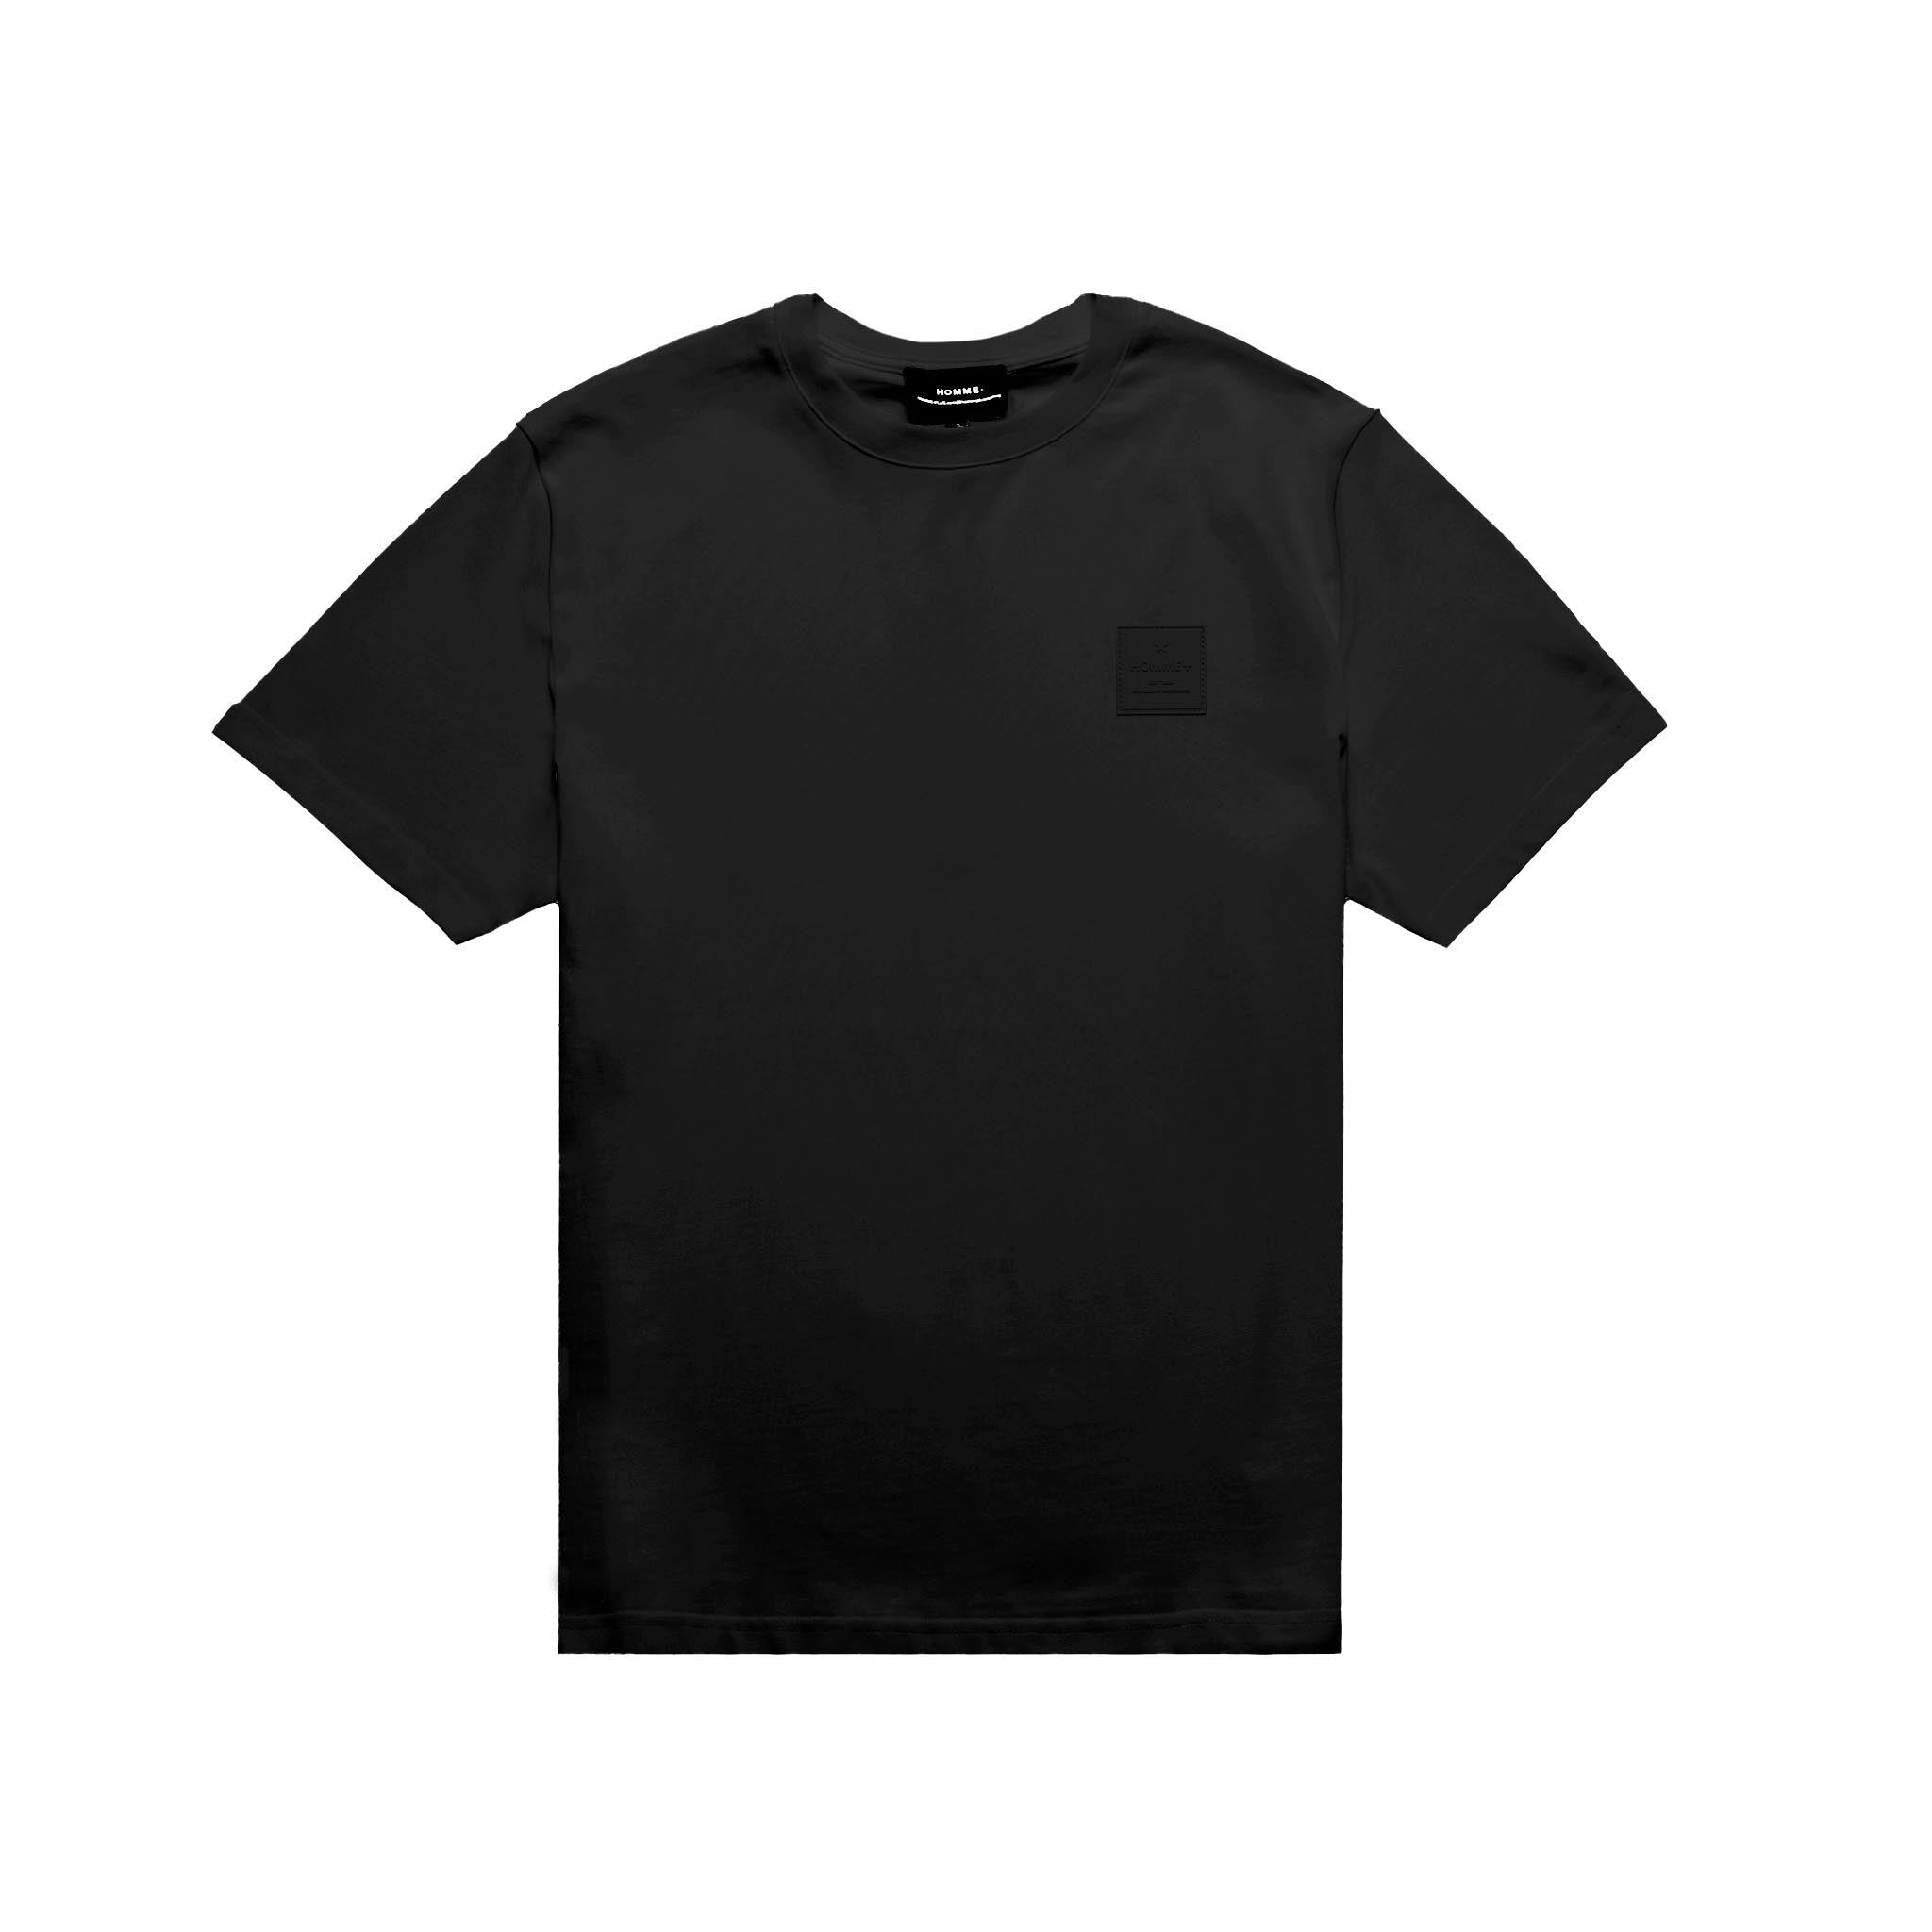 HOMME+ Jersey Patch Tee Black